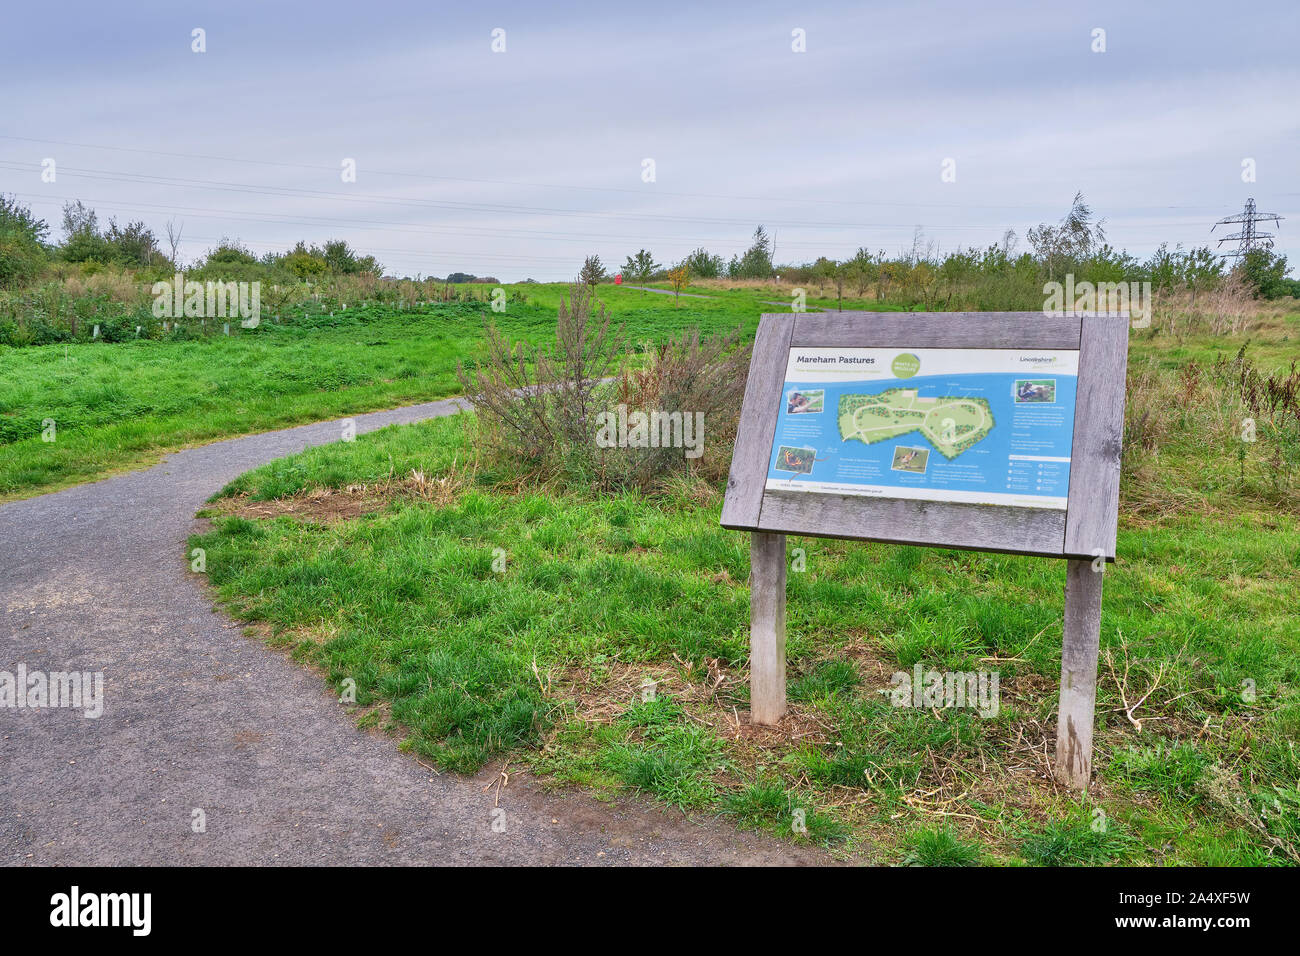 The entrance to Mareham Pastures nature reserve Sleaford, Lincolnshire managed by The Friends of Mareham Pastures and Lincolnshire County Council BHZ Stock Photo